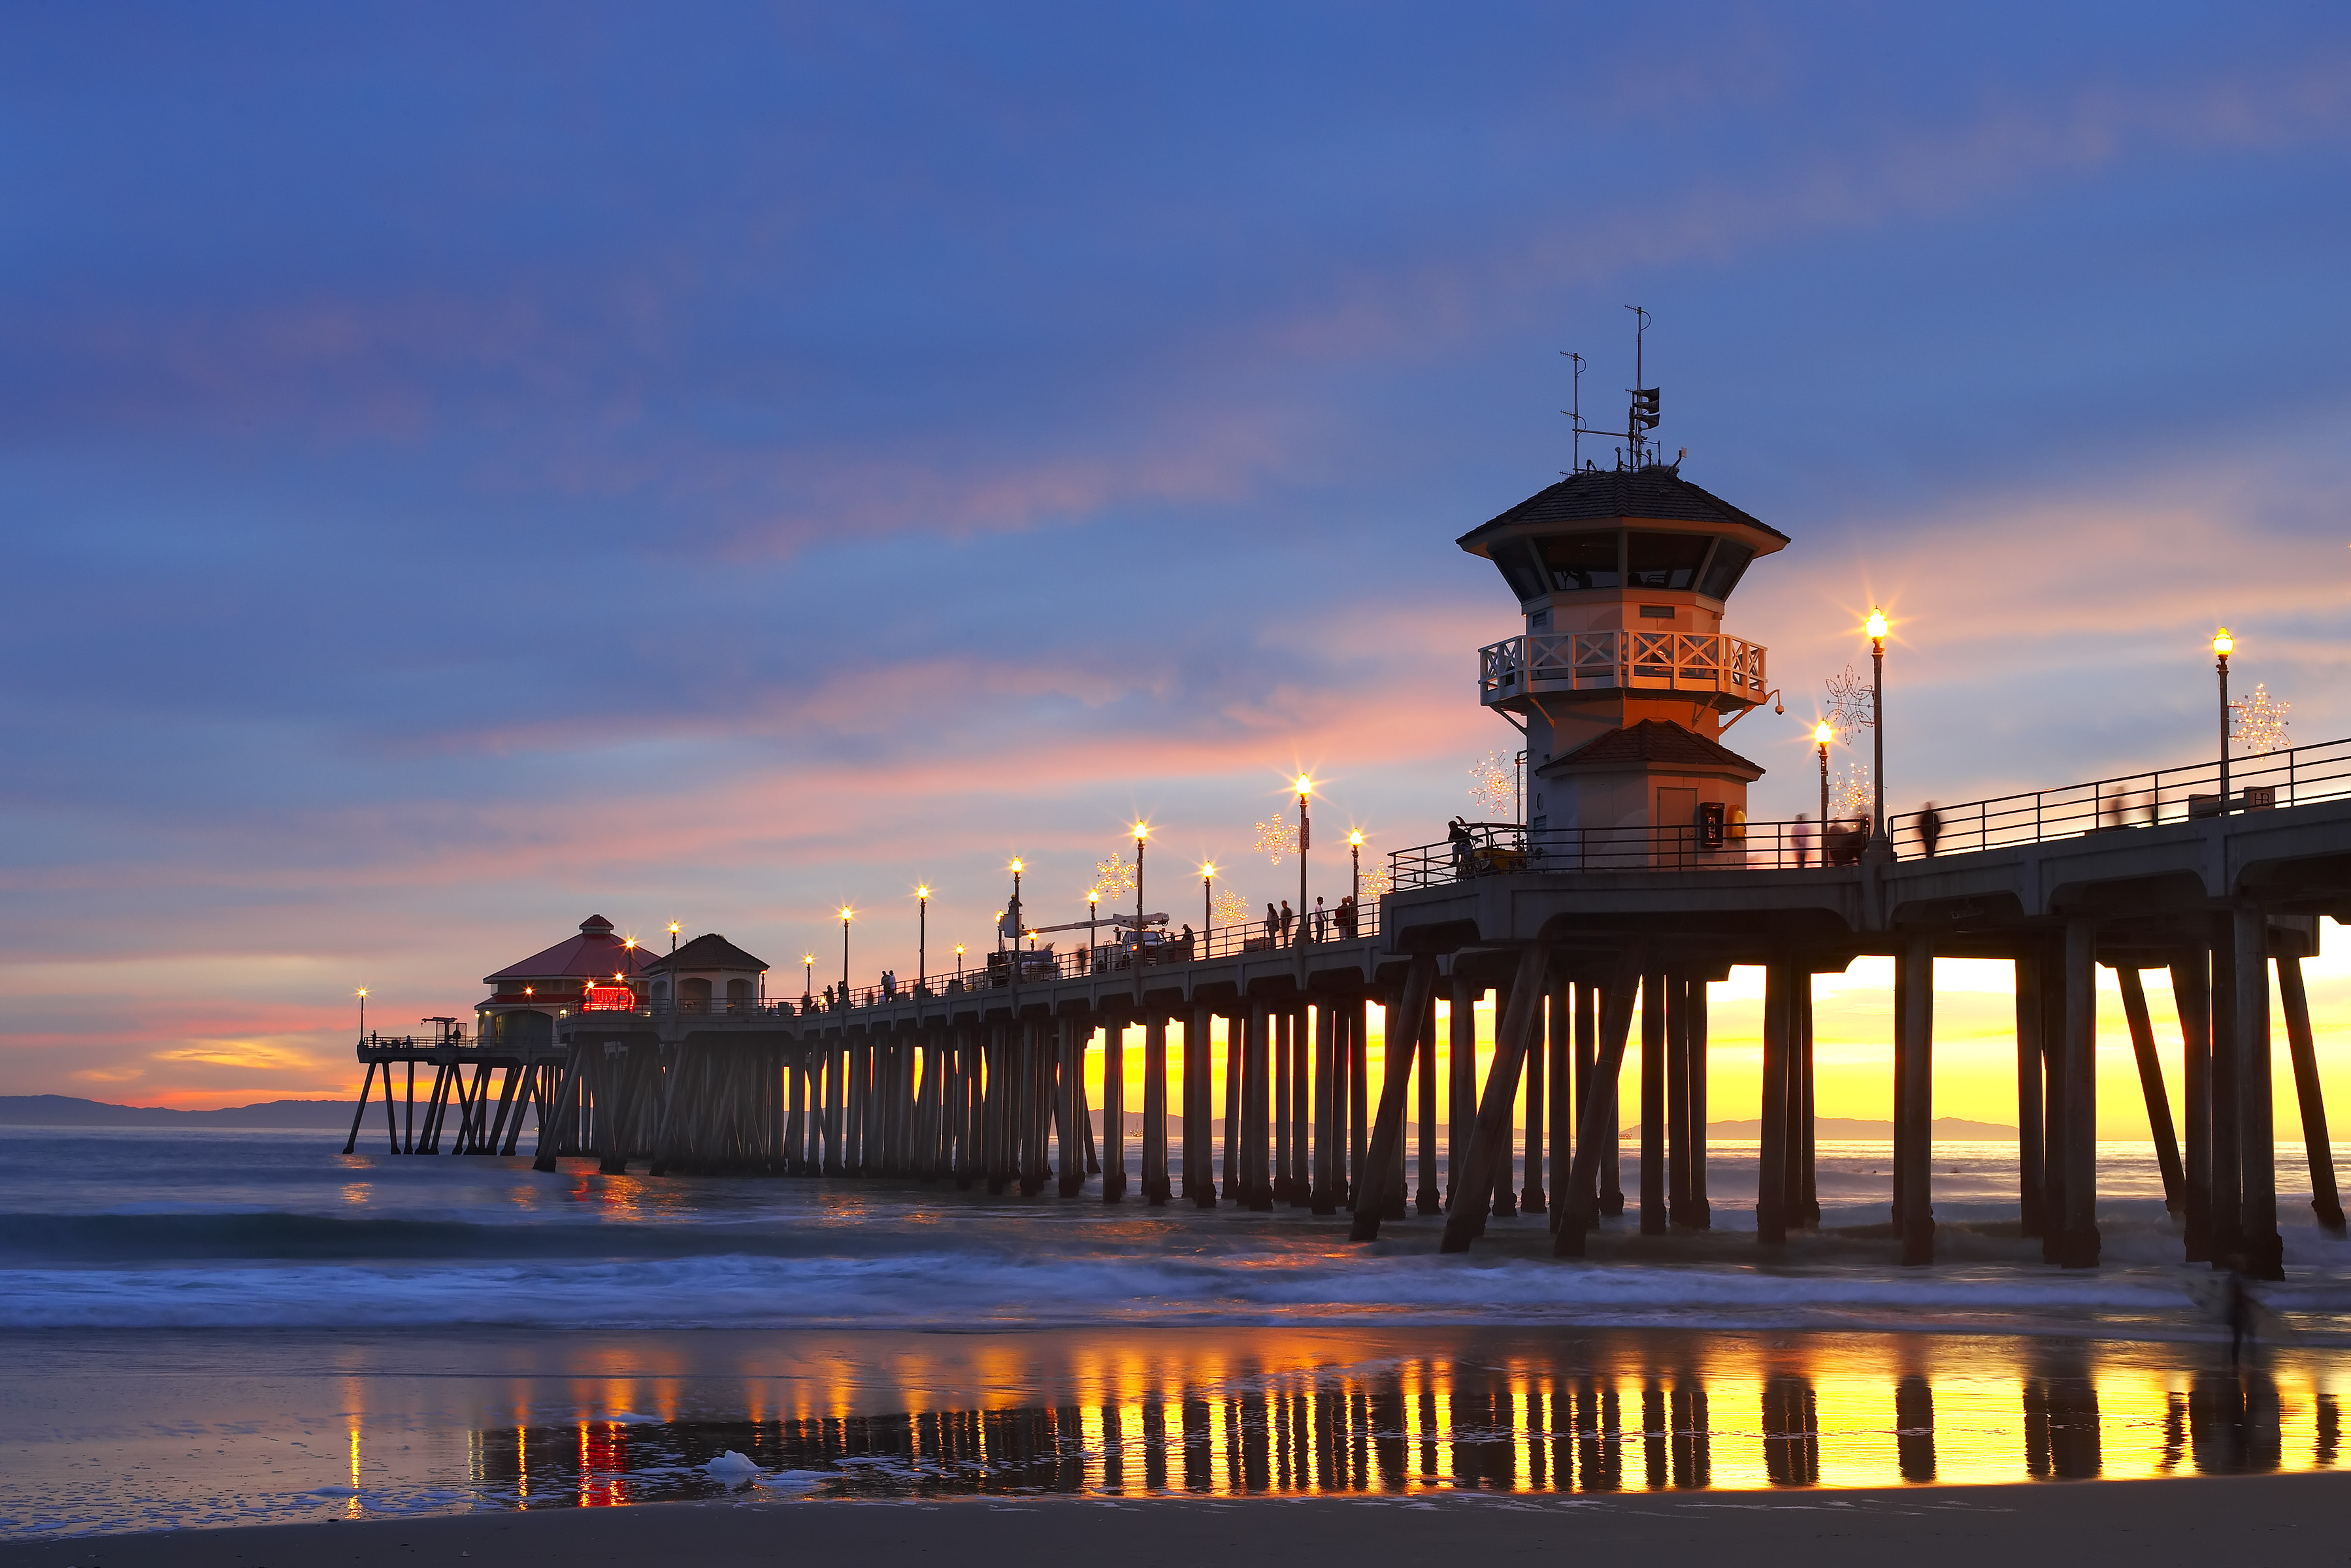 Huntington Beach is one of California's most famous beaches